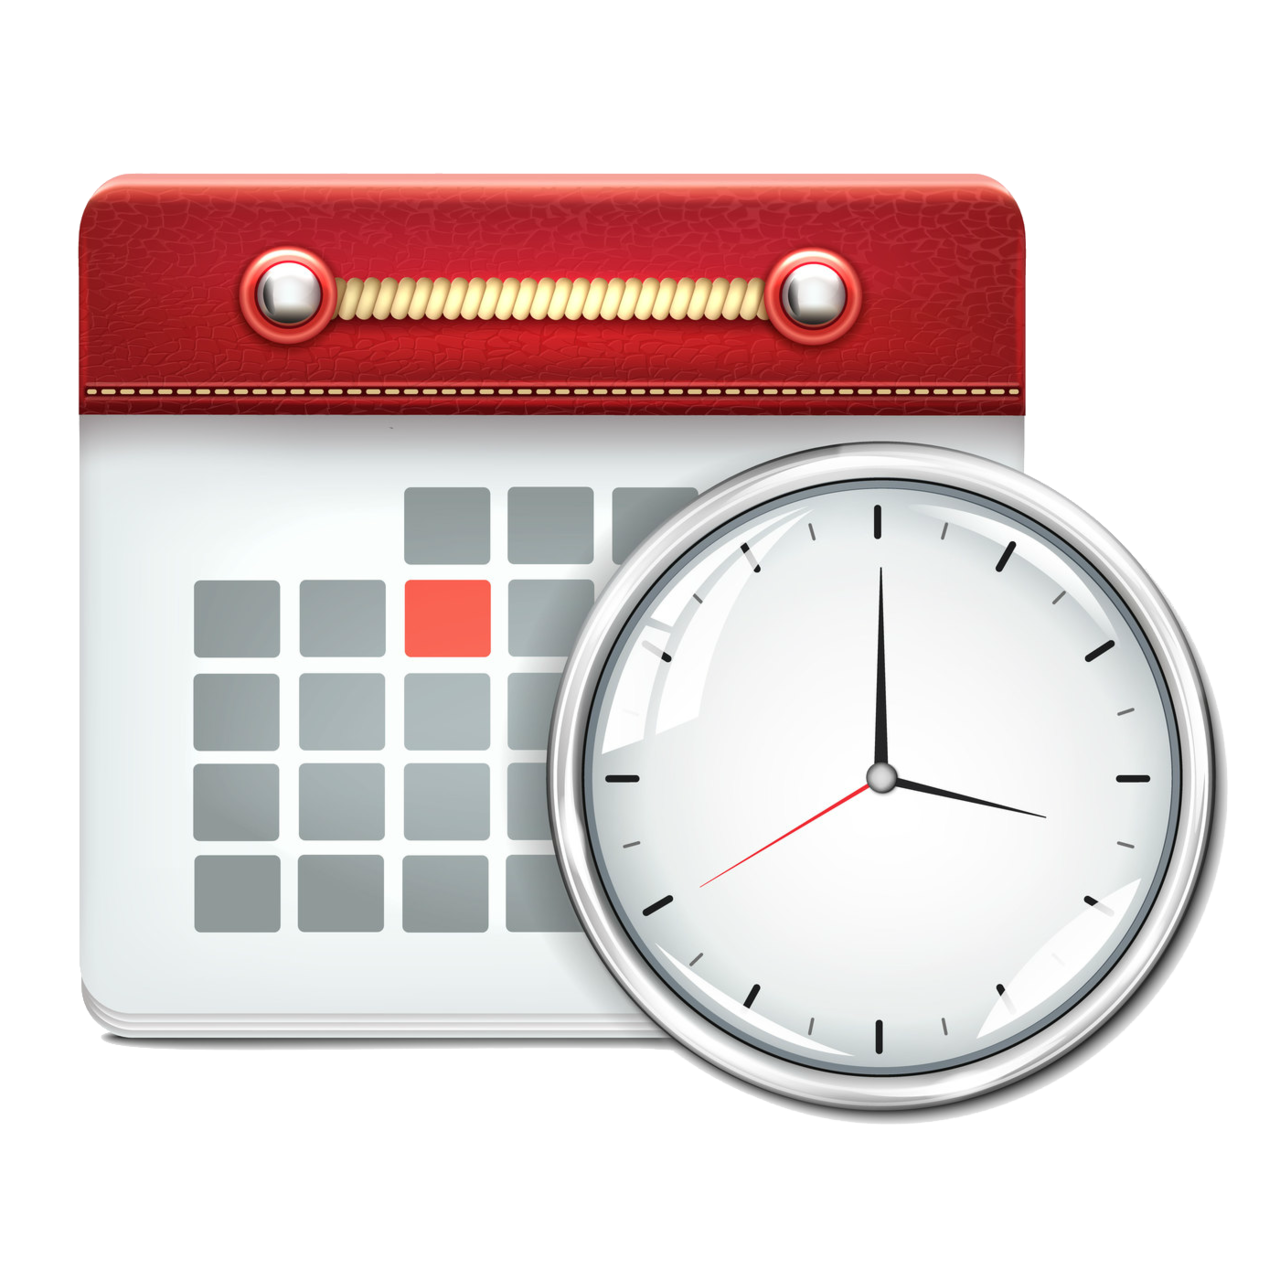 Kisspng clock computer icons royalty free clip art calendar icon 5acee841181407 0521413615235093130986